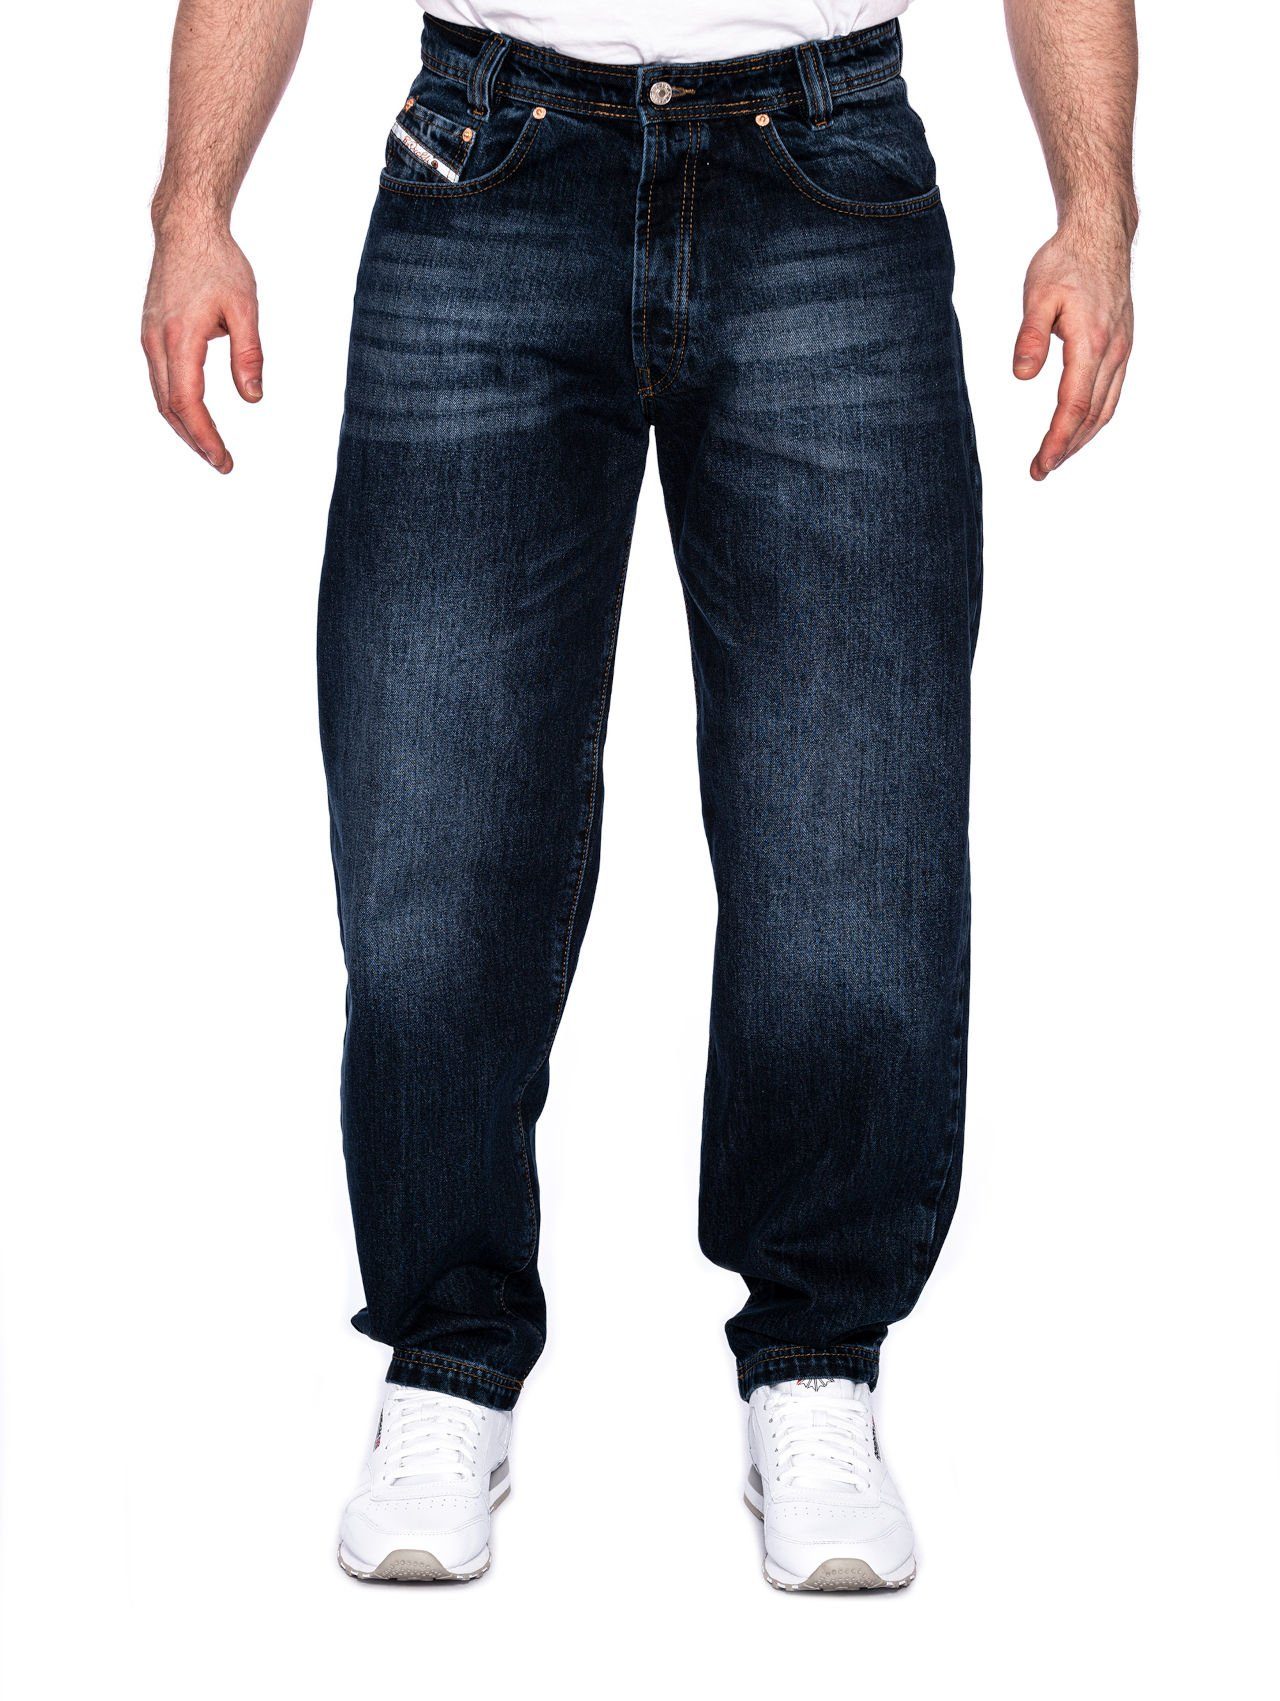 PICALDI Jeans Weite Jeans Zicco 471 Loose Fit, Five Pocket Jeans Hurricane